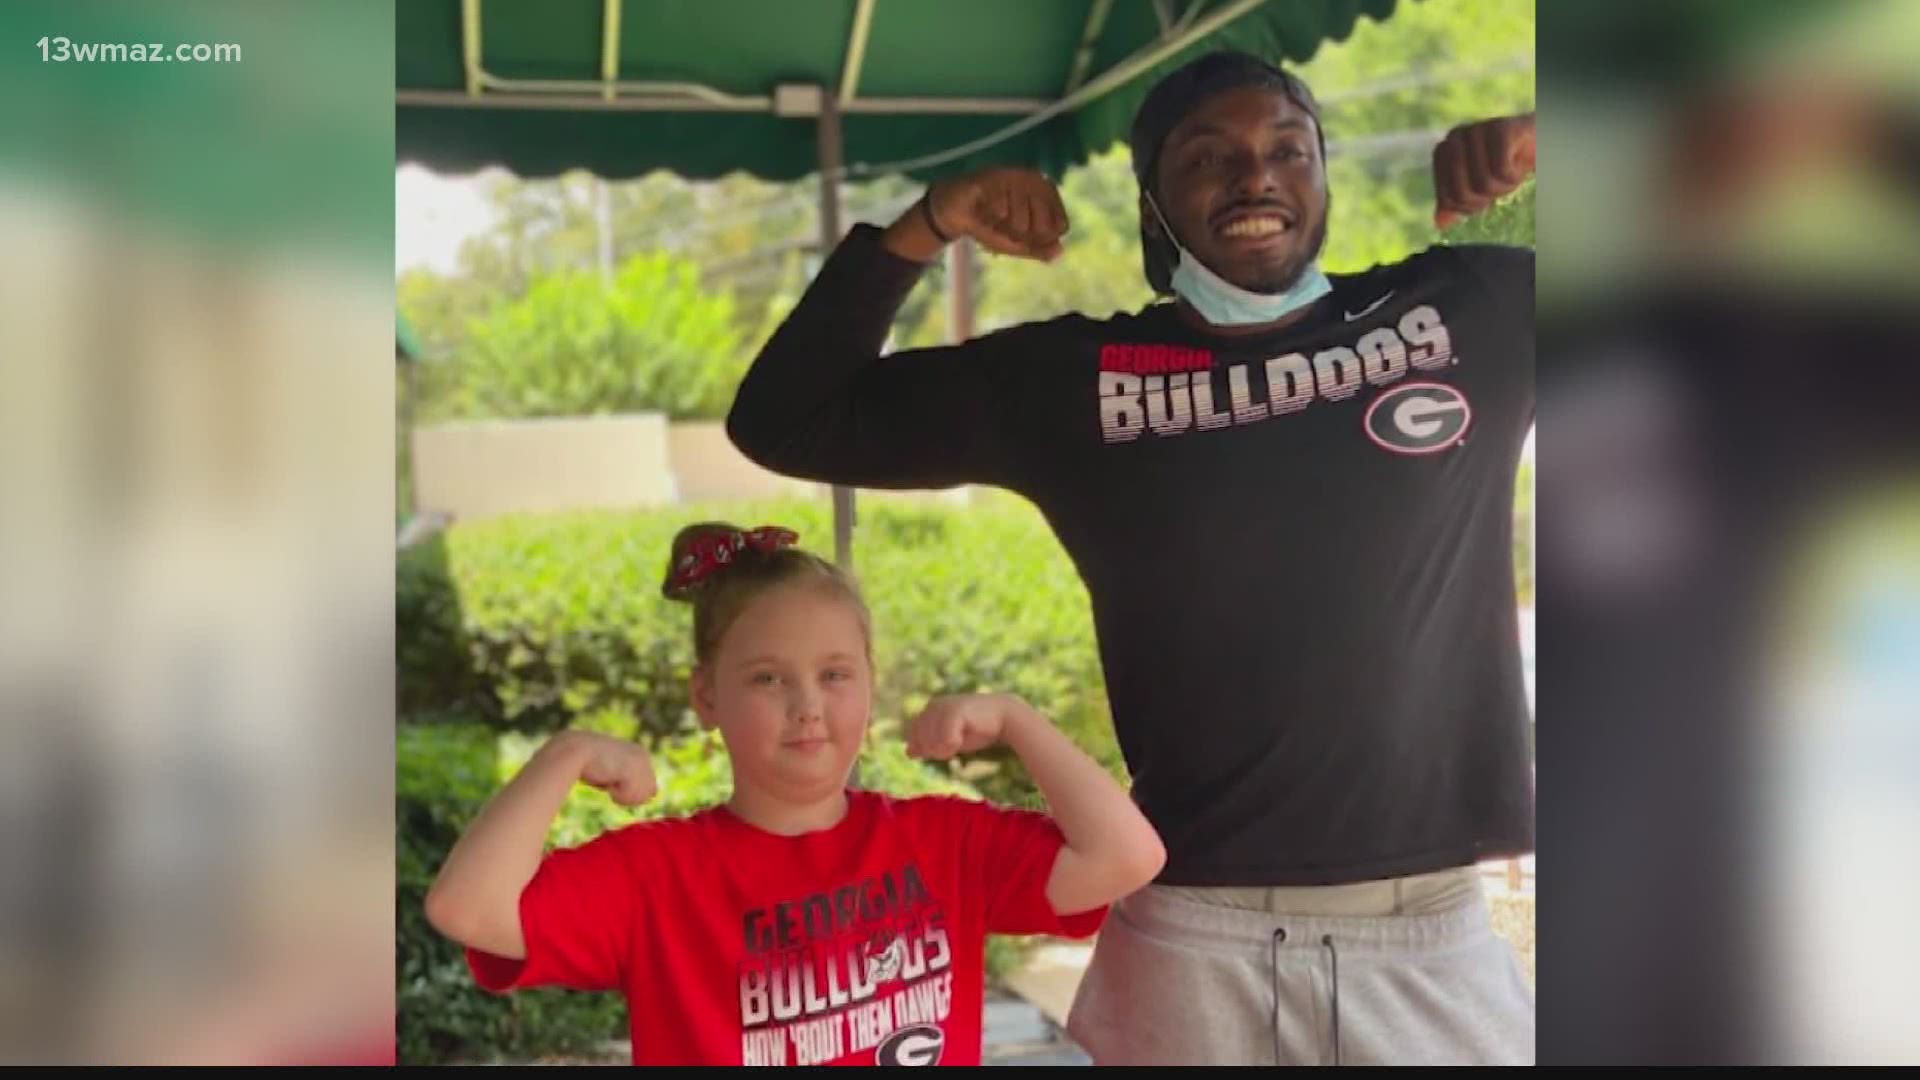 As football is gearing up for its return, one Georgia Bulldog is already making headlines for his off-the-field heroics, helping a family in need.